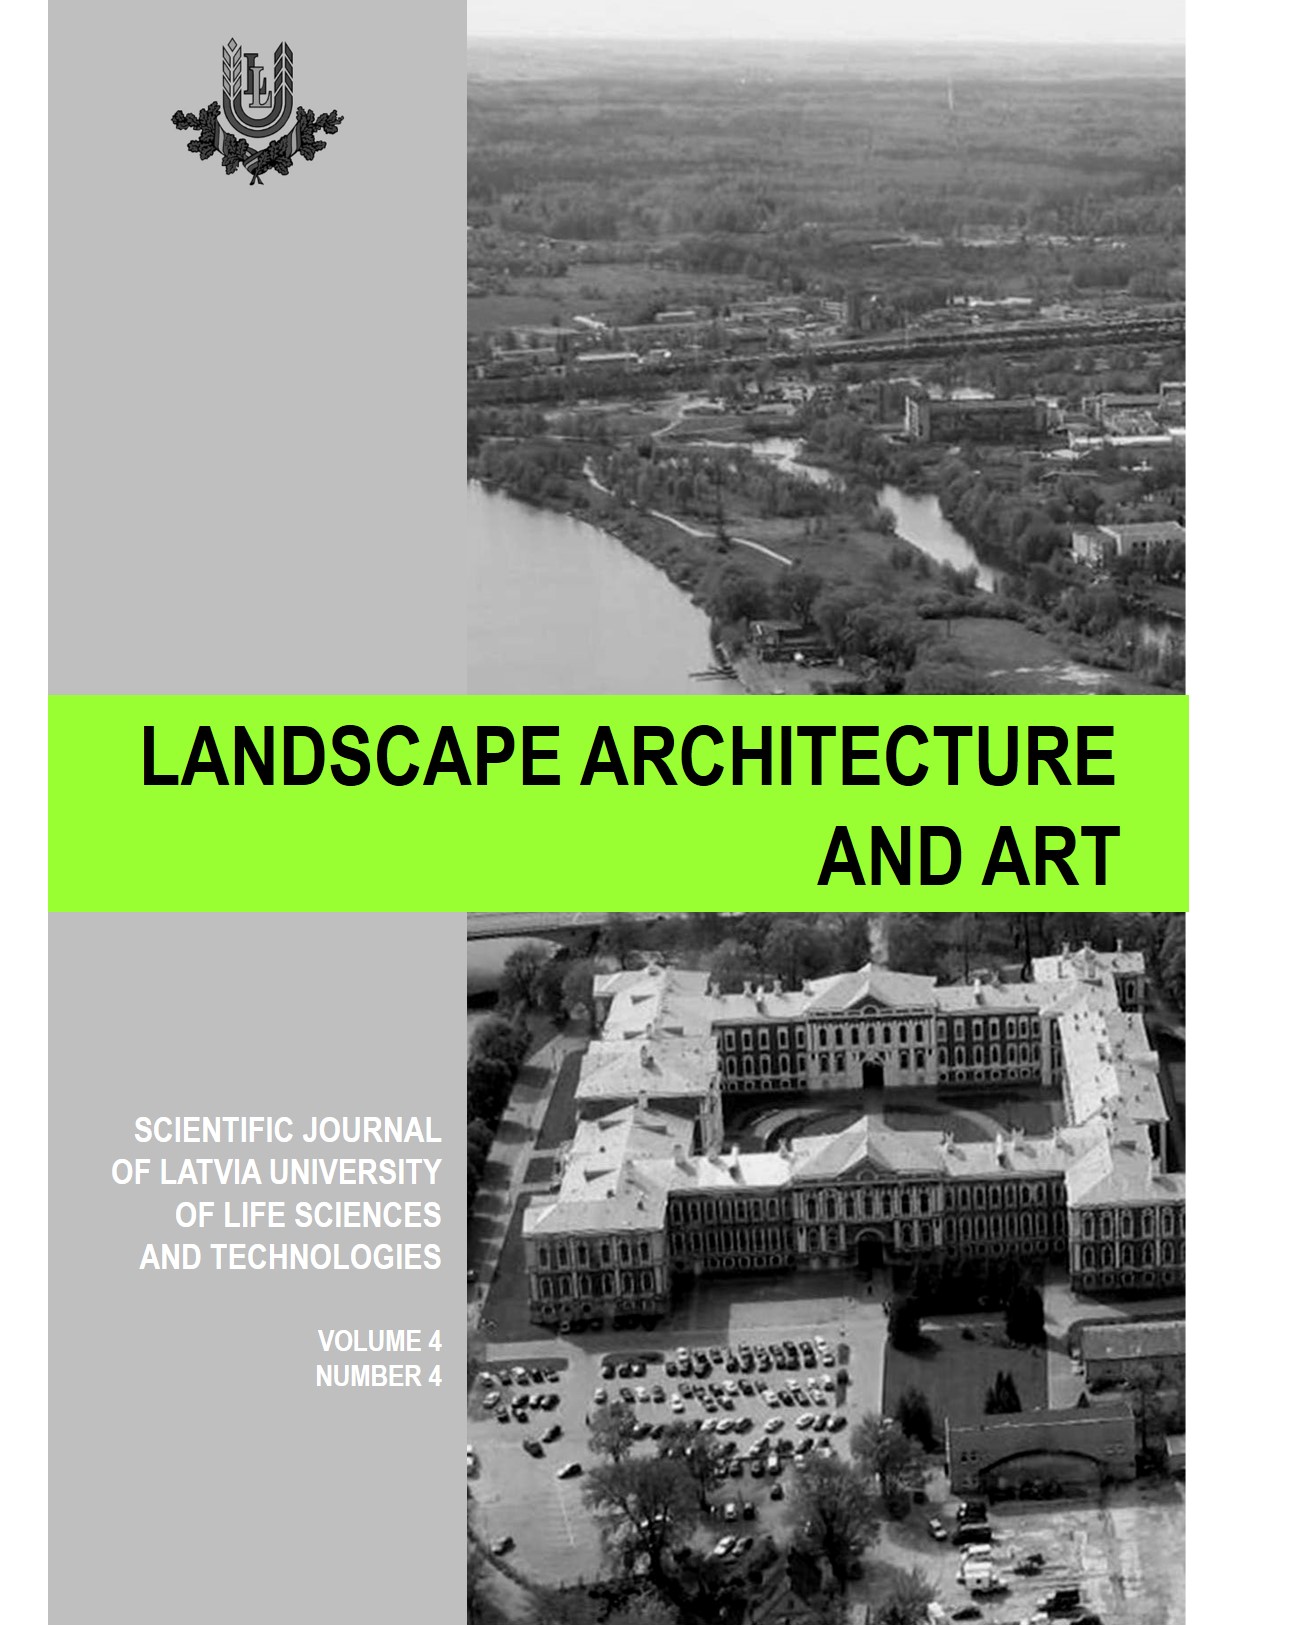 					View Vol. 4 No. 4 (2014): Landscape Architecture and Art, Volume 4, Number 4
				